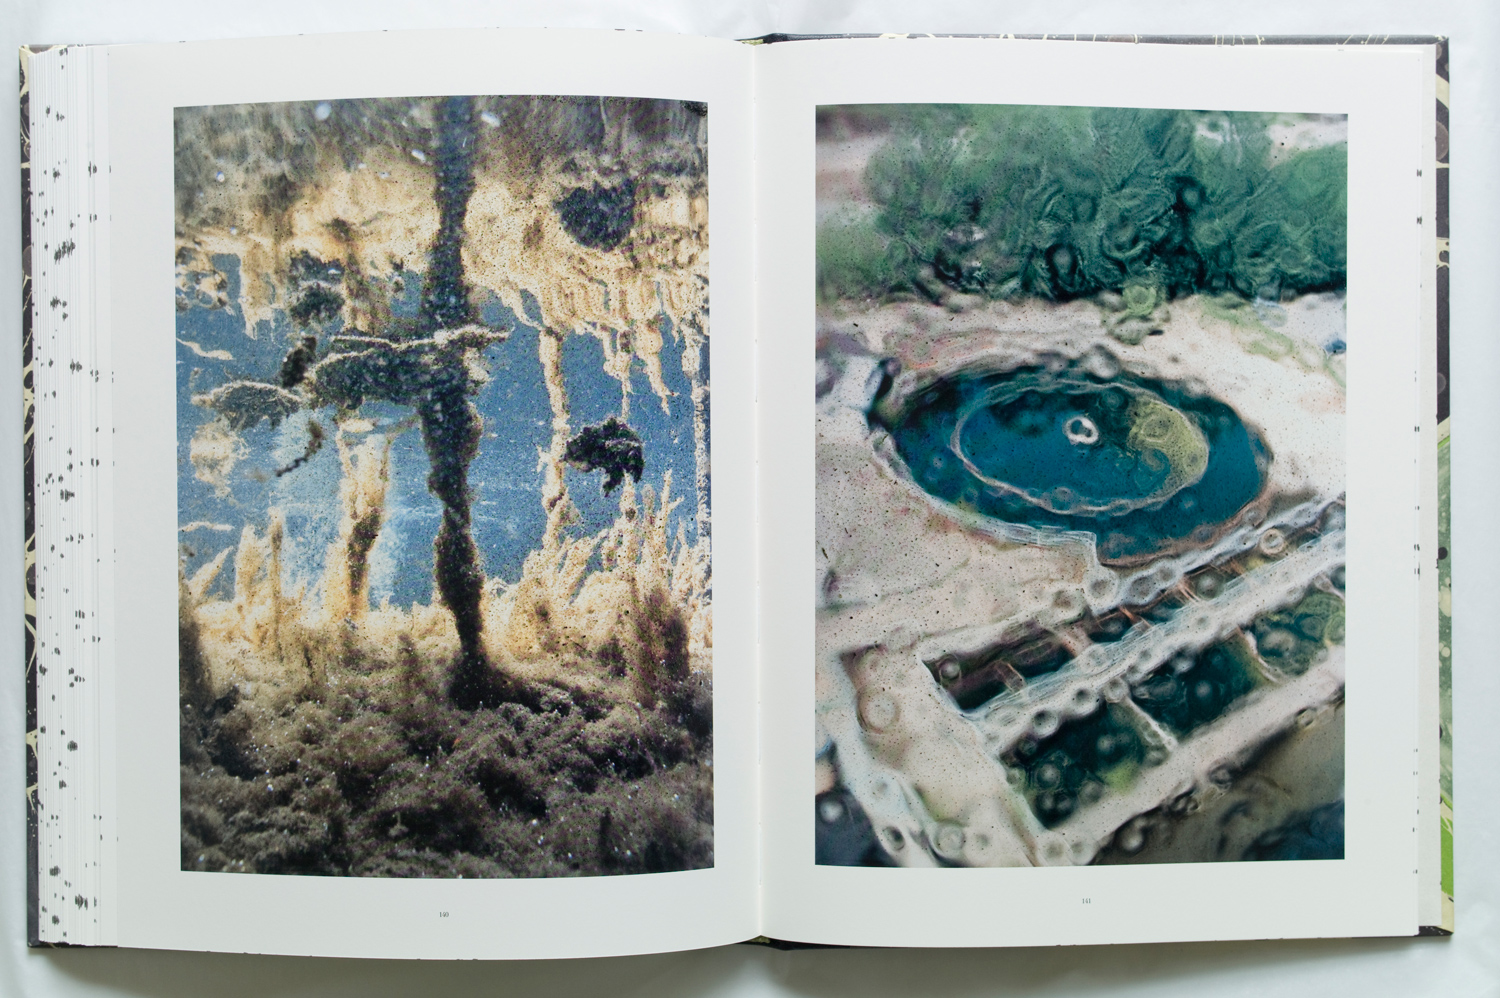 Pages are from Stephen Gill's latest book Coexistence.